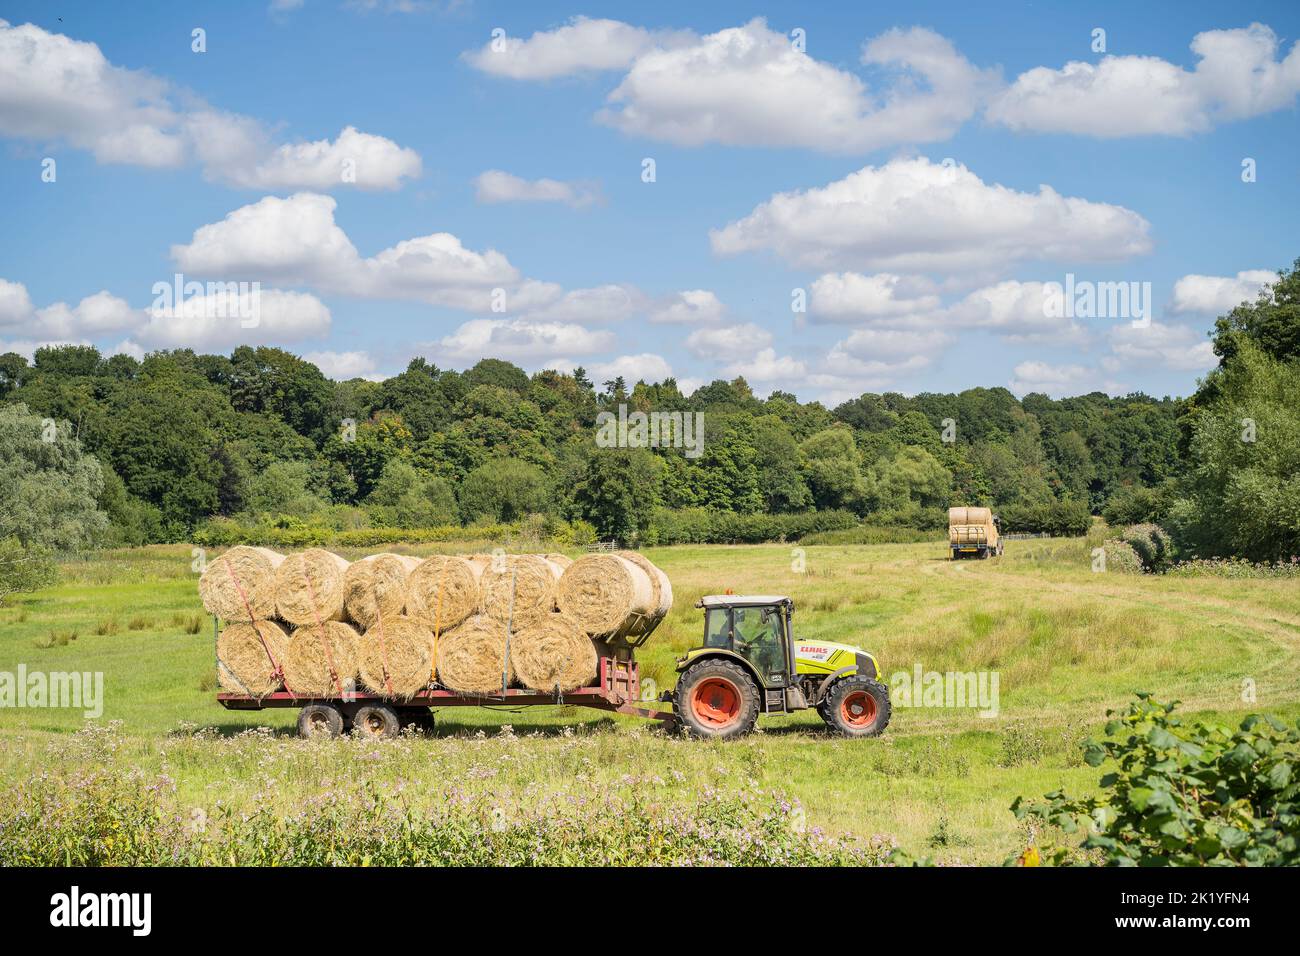 Isolated tractor in rural, countryside field towing trailer of large round hay bales in the summer sunshine. Stock Photo